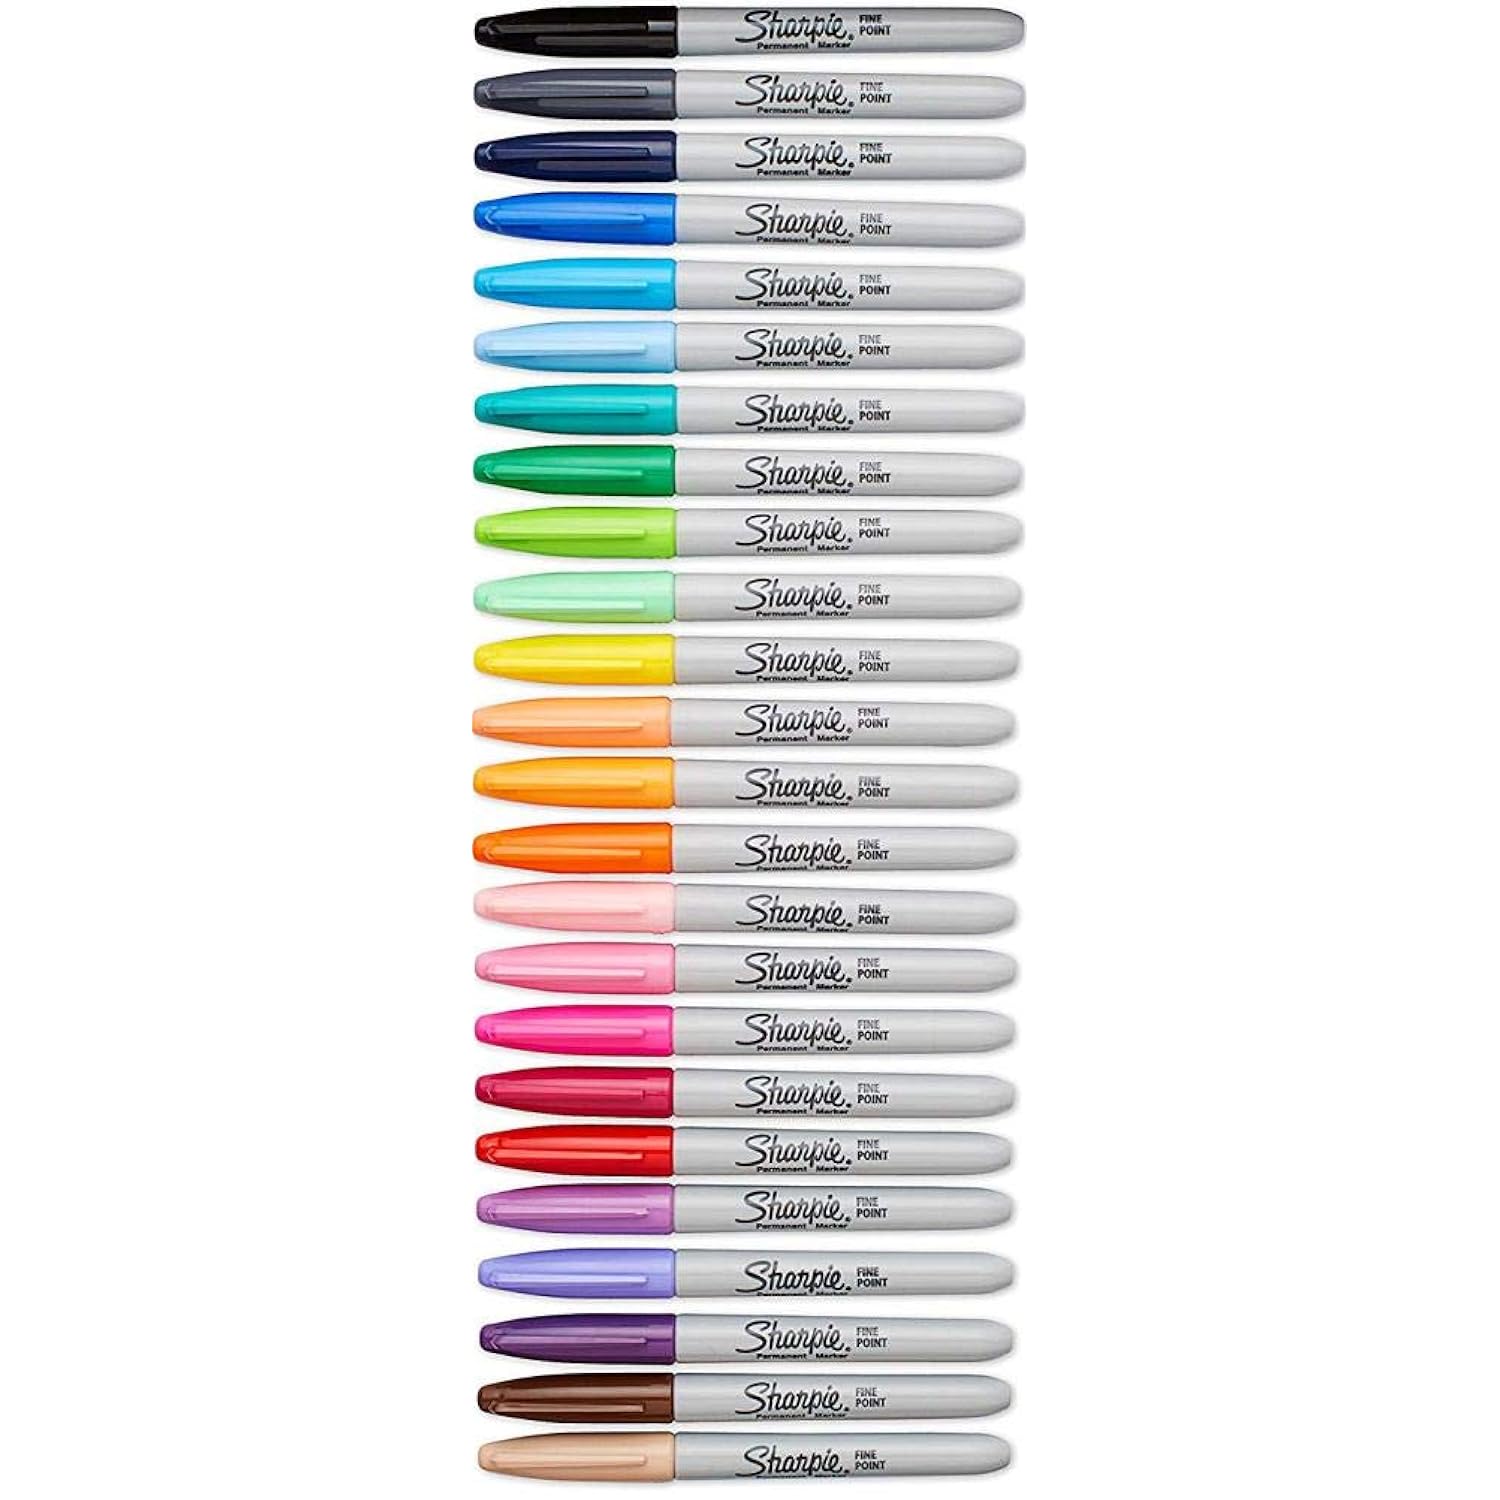 Sharpie 75846 Fine Point Permanent Markers, Assorted Colors; 4 Sets of 24 Markers, Total 96 Markers; Proudly Permanent Ink …